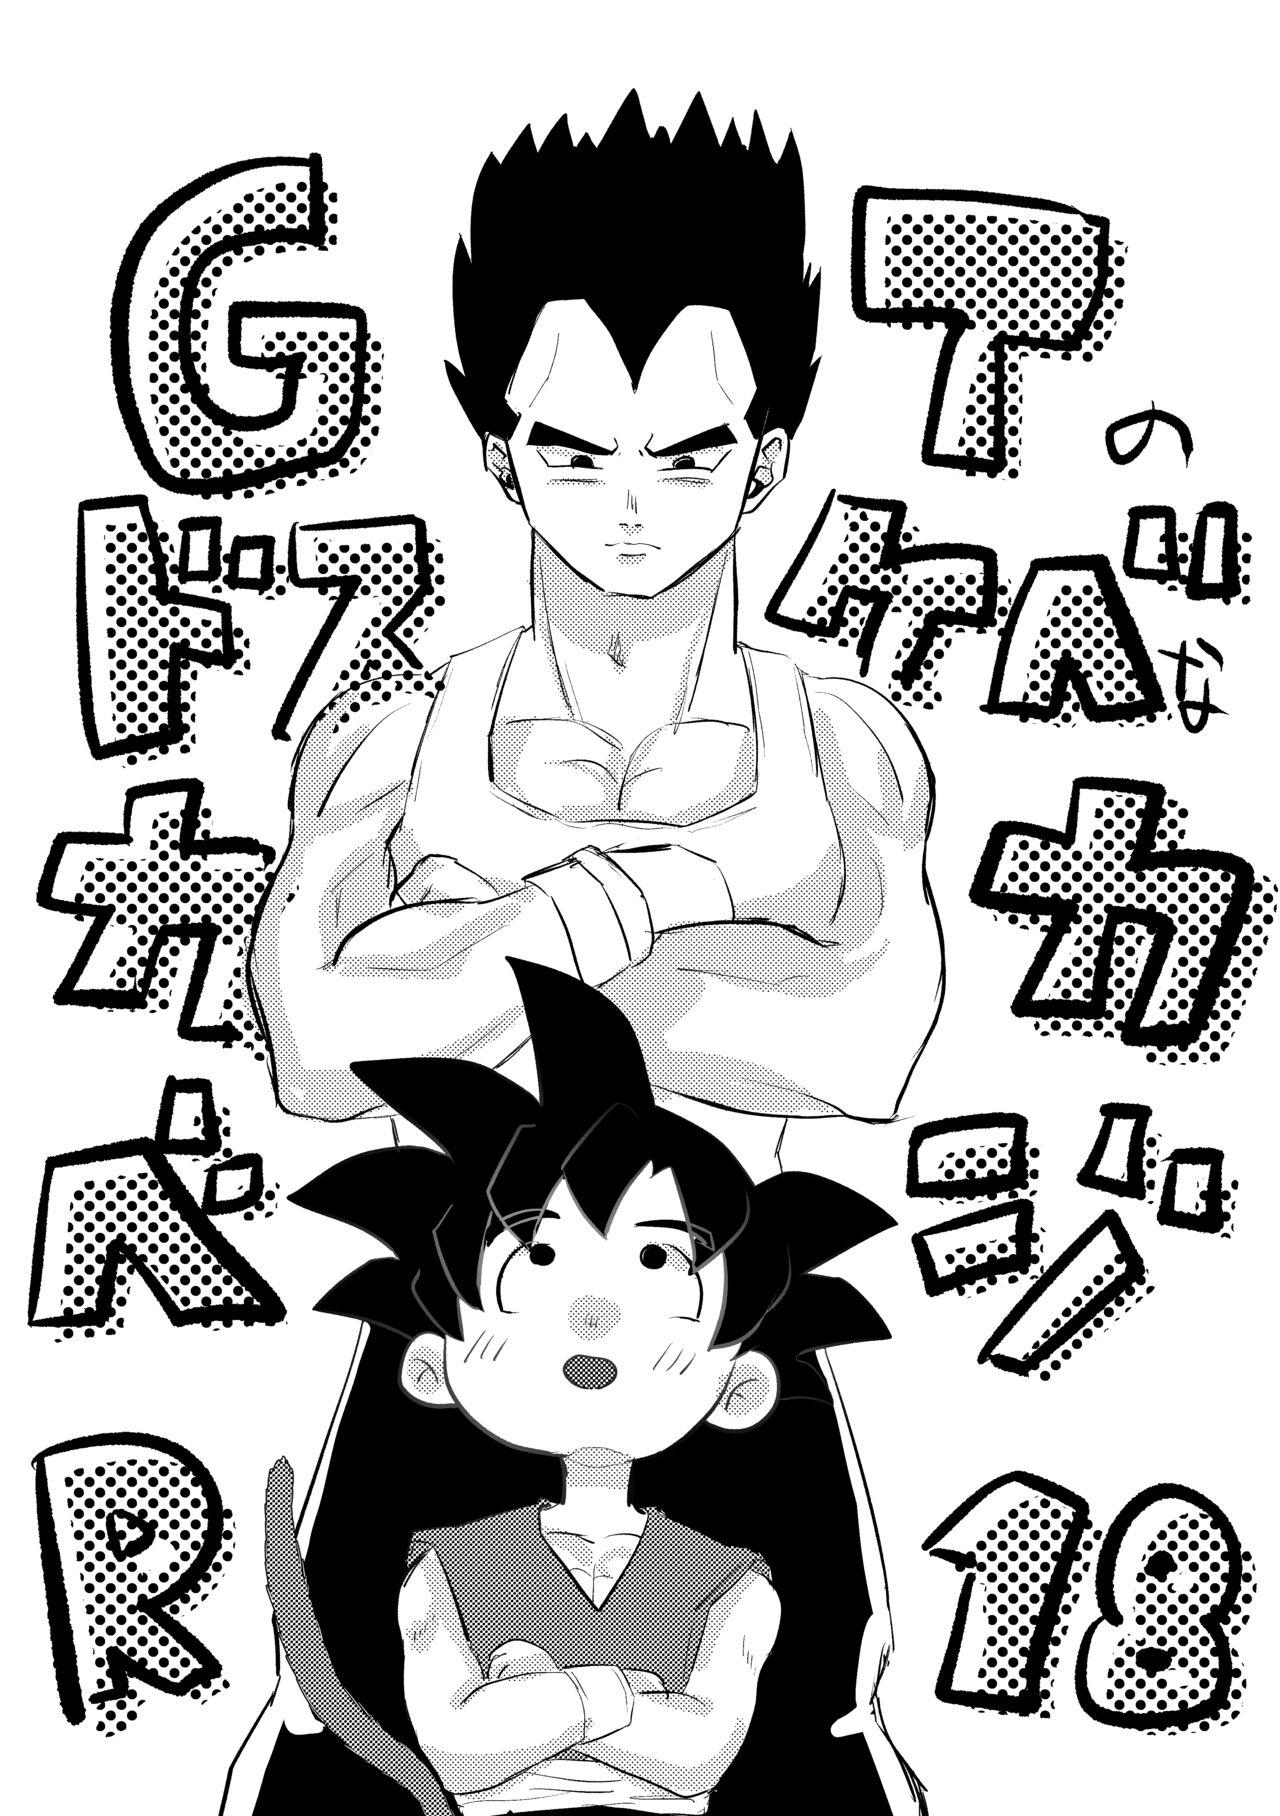 Relax GT no Dosukebe na KakaVege - Dragon ball gt Gay Shorthair - Page 1